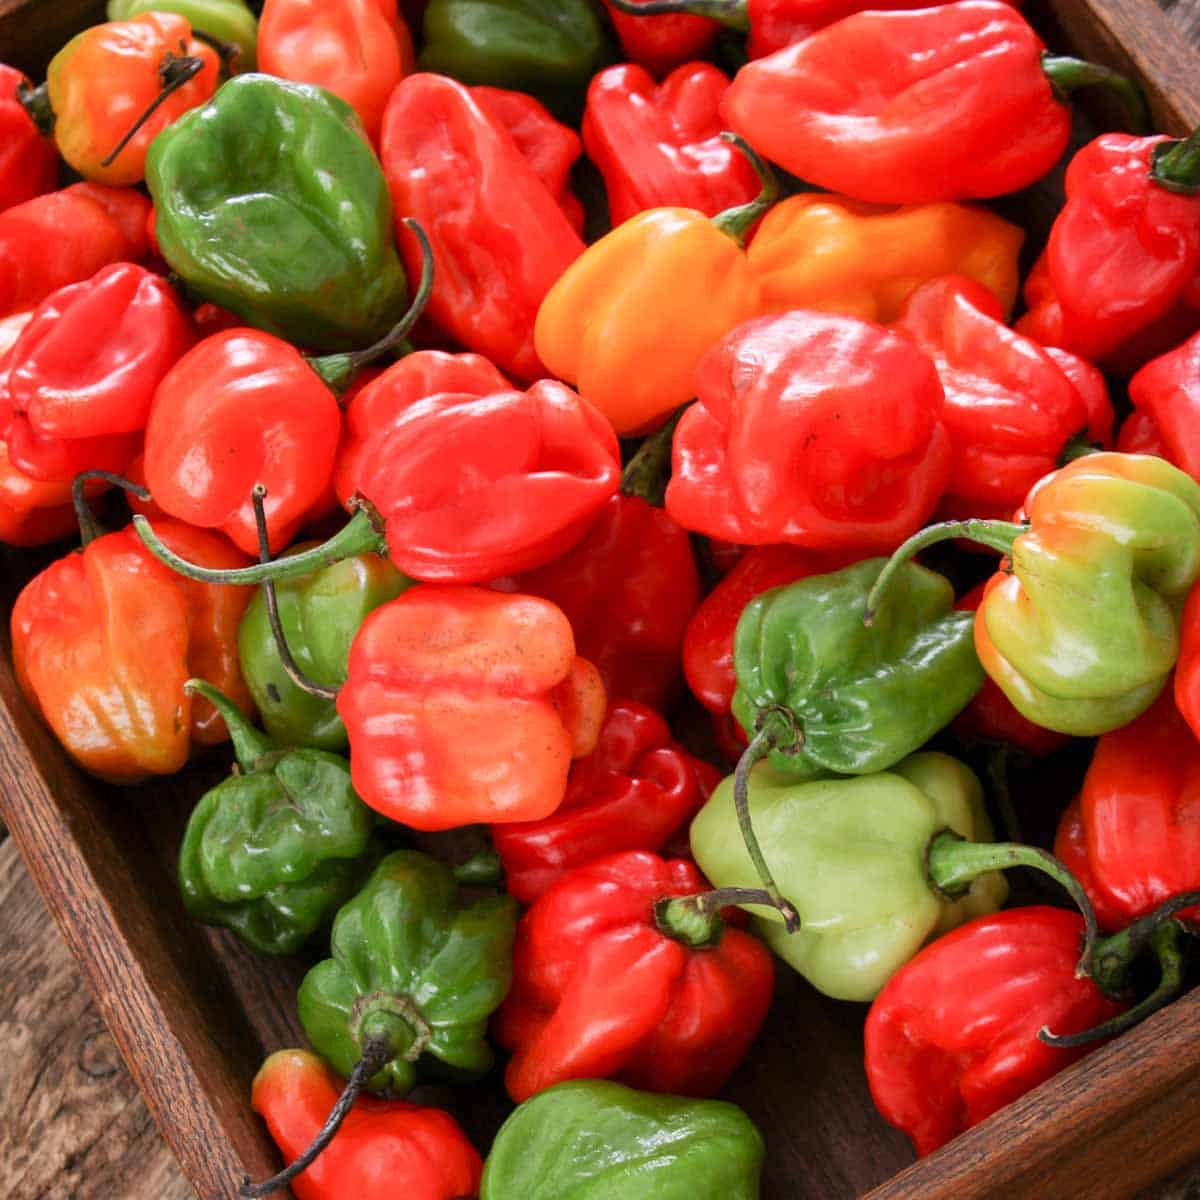 Red, green, and orange scotch bonnet peppers sit in a wooden tray.